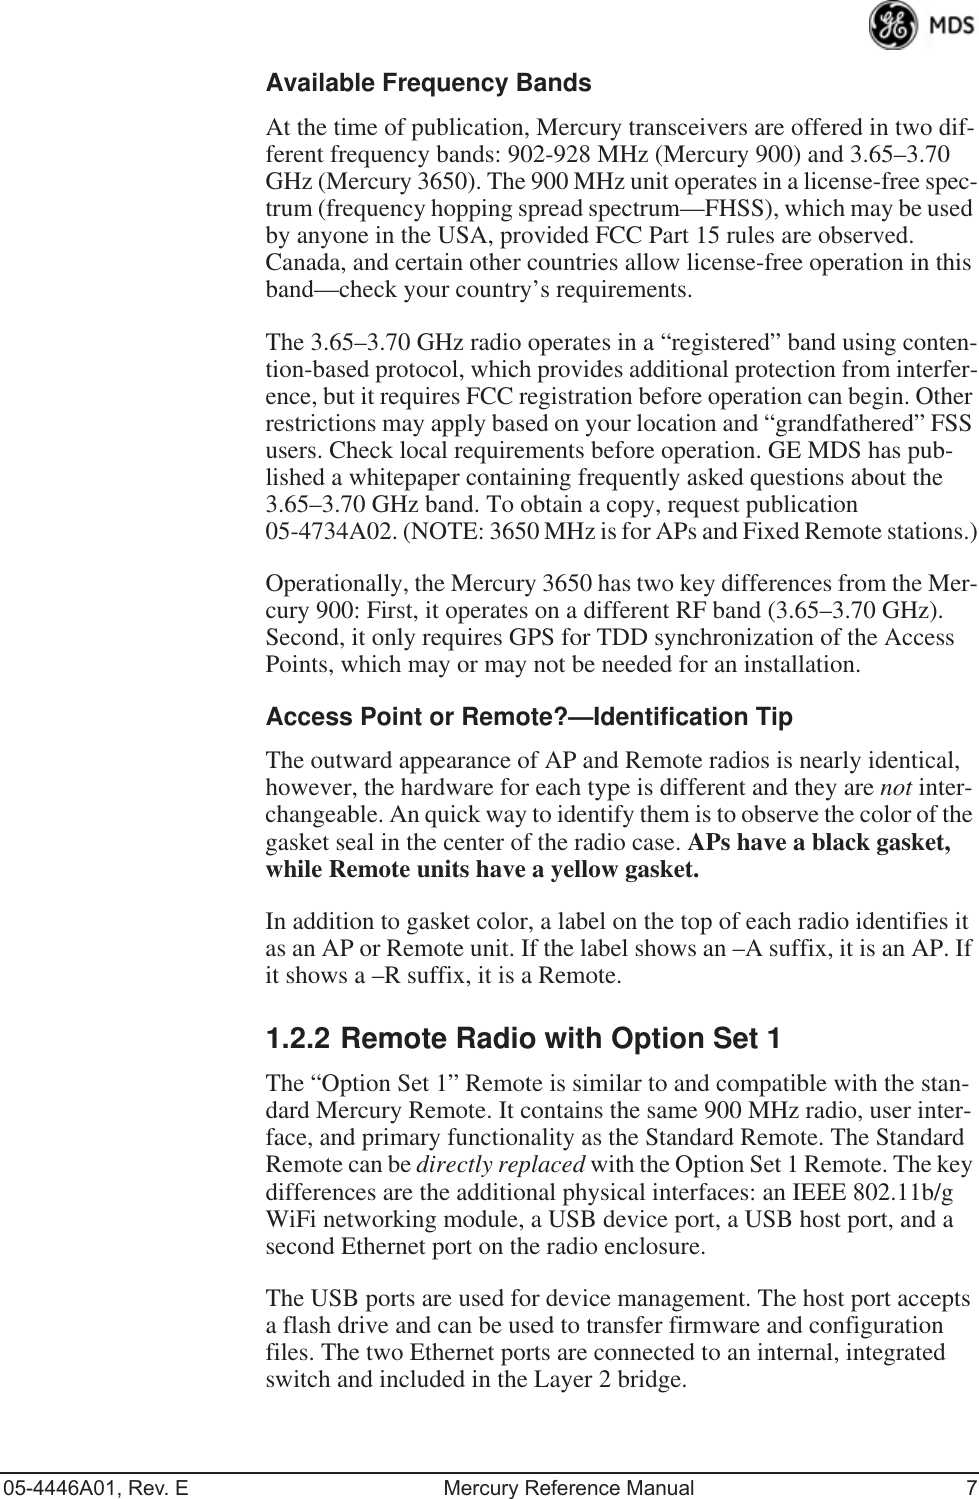 05-4446A01, Rev. E Mercury Reference Manual 7Available Frequency BandsAt the time of publication, Mercury transceivers are offered in two dif-ferent frequency bands: 902-928 MHz (Mercury 900) and 3.65–3.70 GHz (Mercury 3650). The 900 MHz unit operates in a license-free spec-trum (frequency hopping spread spectrum—FHSS), which may be used by anyone in the USA, provided FCC Part 15 rules are observed. Canada, and certain other countries allow license-free operation in this band—check your country’s requirements.The 3.65–3.70 GHz radio operates in a “registered” band using conten-tion-based protocol, which provides additional protection from interfer-ence, but it requires FCC registration before operation can begin. Other restrictions may apply based on your location and “grandfathered” FSS users. Check local requirements before operation. GE MDS has pub-lished a whitepaper containing frequently asked questions about the 3.65–3.70 GHz band. To obtain a copy, request publication 05-4734A02. (NOTE: 3650 MHz is for APs and Fixed Remote stations.)Operationally, the Mercury 3650 has two key differences from the Mer-cury 900: First, it operates on a different RF band (3.65–3.70 GHz). Second, it only requires GPS for TDD synchronization of the Access Points, which may or may not be needed for an installation.Access Point or Remote?—Identification TipThe outward appearance of AP and Remote radios is nearly identical, however, the hardware for each type is different and they are not inter-changeable. An quick way to identify them is to observe the color of the gasket seal in the center of the radio case. APs have a black gasket, while Remote units have a yellow gasket.In addition to gasket color, a label on the top of each radio identifies it as an AP or Remote unit. If the label shows an –A suffix, it is an AP. If it shows a –R suffix, it is a Remote.1.2.2 Remote Radio with Option Set 1The “Option Set 1” Remote is similar to and compatible with the stan-dard Mercury Remote. It contains the same 900 MHz radio, user inter-face, and primary functionality as the Standard Remote. The Standard Remote can be directly replaced with the Option Set 1 Remote. The key differences are the additional physical interfaces: an IEEE 802.11b/g WiFi networking module, a USB device port, a USB host port, and a second Ethernet port on the radio enclosure.The USB ports are used for device management. The host port accepts a flash drive and can be used to transfer firmware and configuration files. The two Ethernet ports are connected to an internal, integrated switch and included in the Layer 2 bridge.